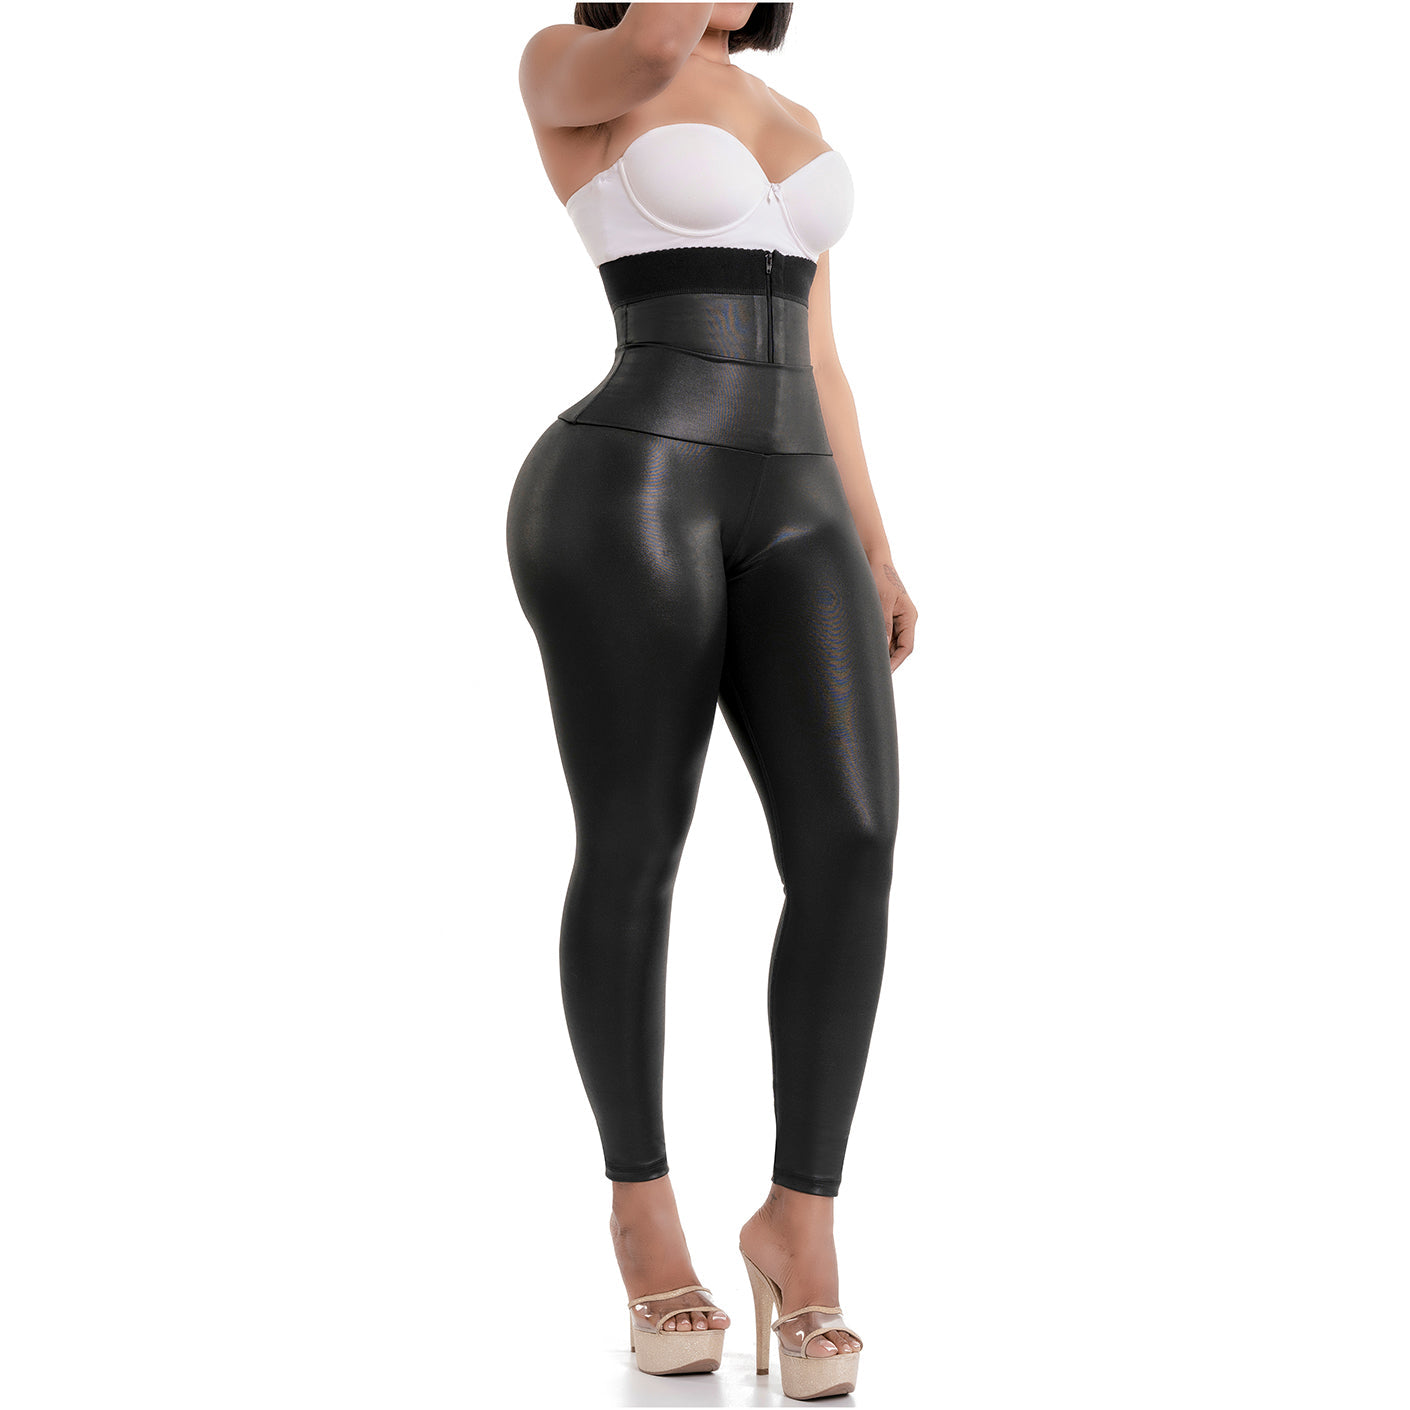 Buy Womens Weight Loss Hot Neoprene Sauna Sweat Pants with Side Pocket  Workout Thighs Slimming Capris Leggings Body Shaper (Black, S) at Amazon.in